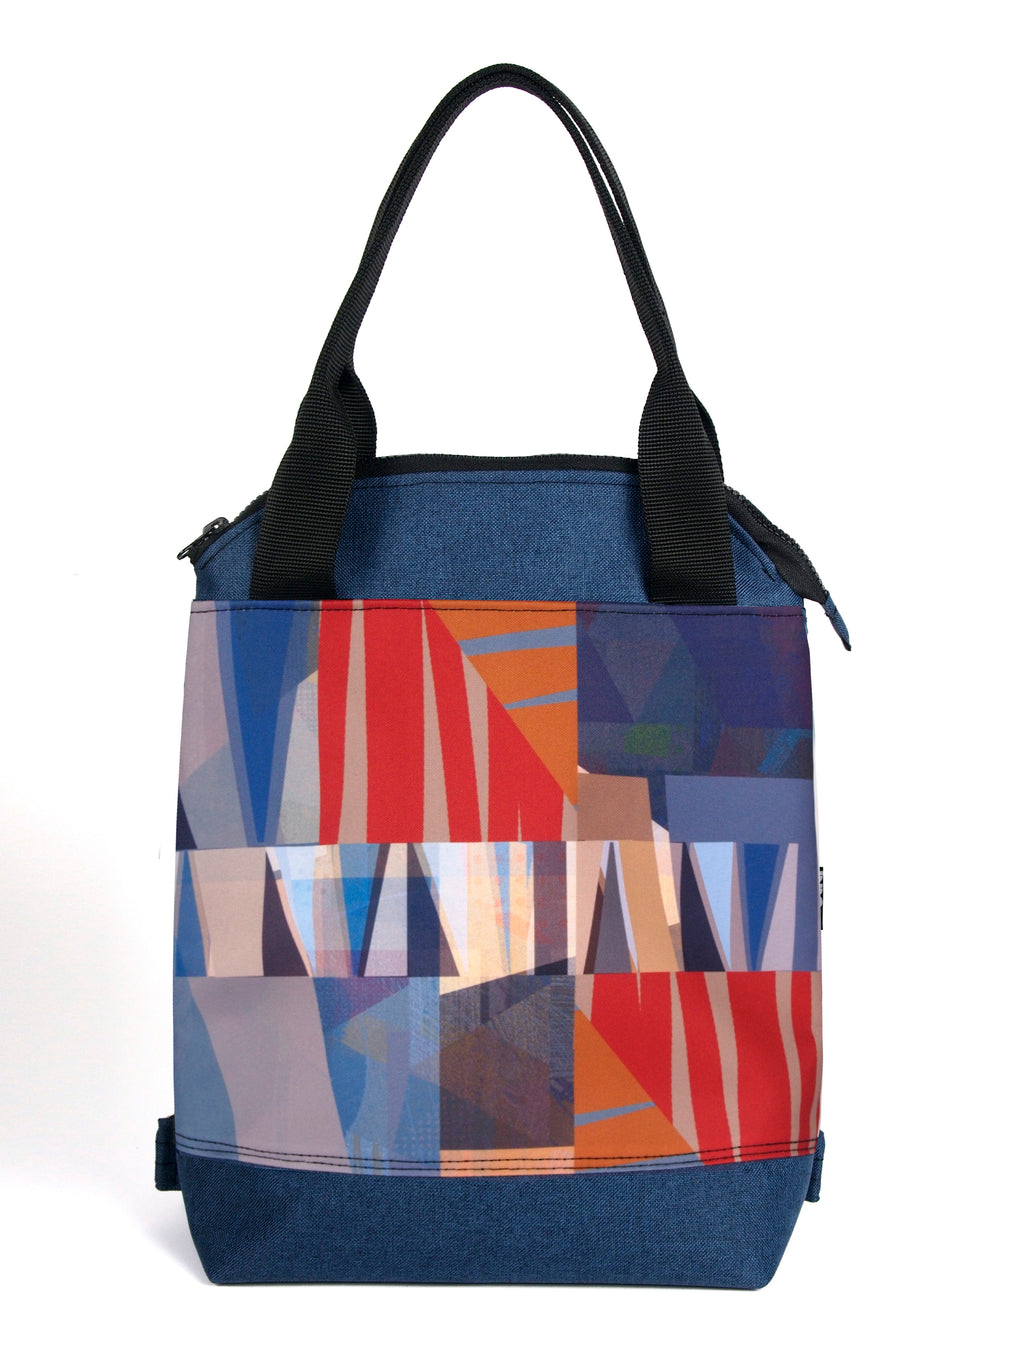 Bardo classic backpack textiles -  Gray shade - Premium Textiles from BARDO ART WORKS - Just lvabstract, black, floral, handemade, leaves, tablet, urban style, woman, work bag89! Shop now at BARDO ART WORKS